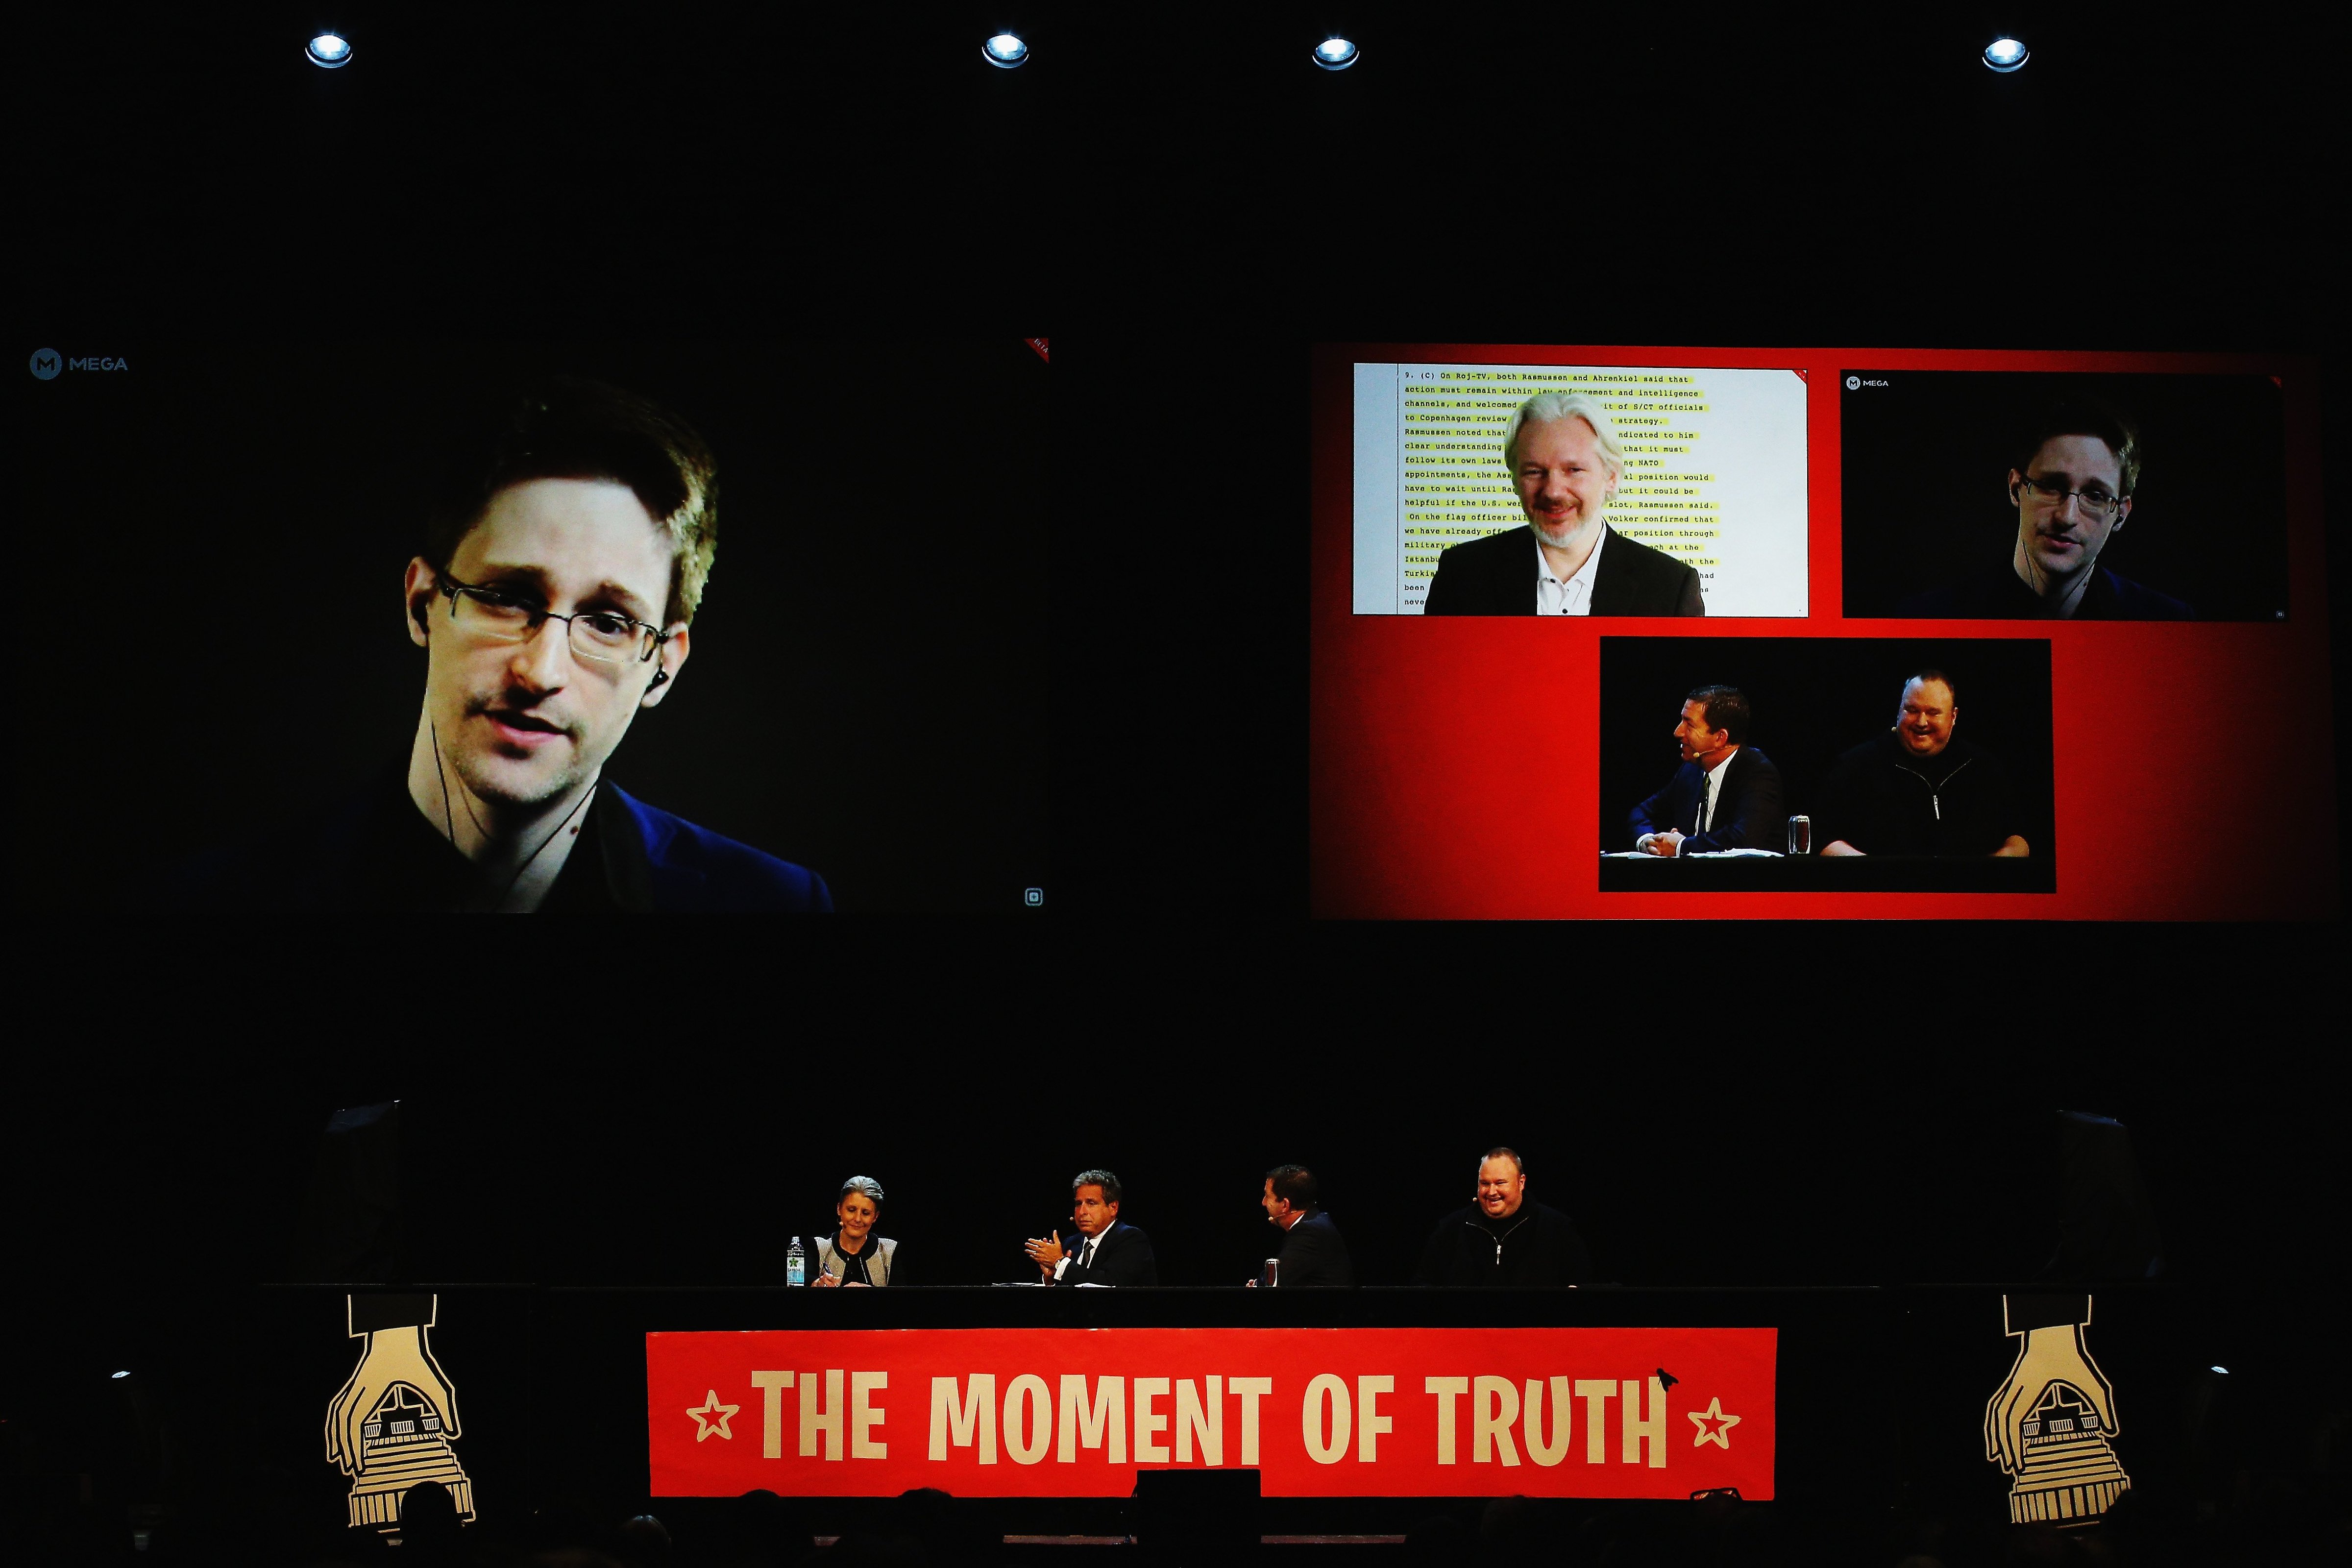 Edward Snowden, Julian Assange, Internet Party leader Laila Harre, Robert Amsterdam, Glenn Greenwald and Kim Dotcom discuss the revelations about New Zealand's mass surveillance at Auckland Town Hall in Auckland, New Zealand on Sept. 15, 2014. (Hannah Peters—Getty Images)